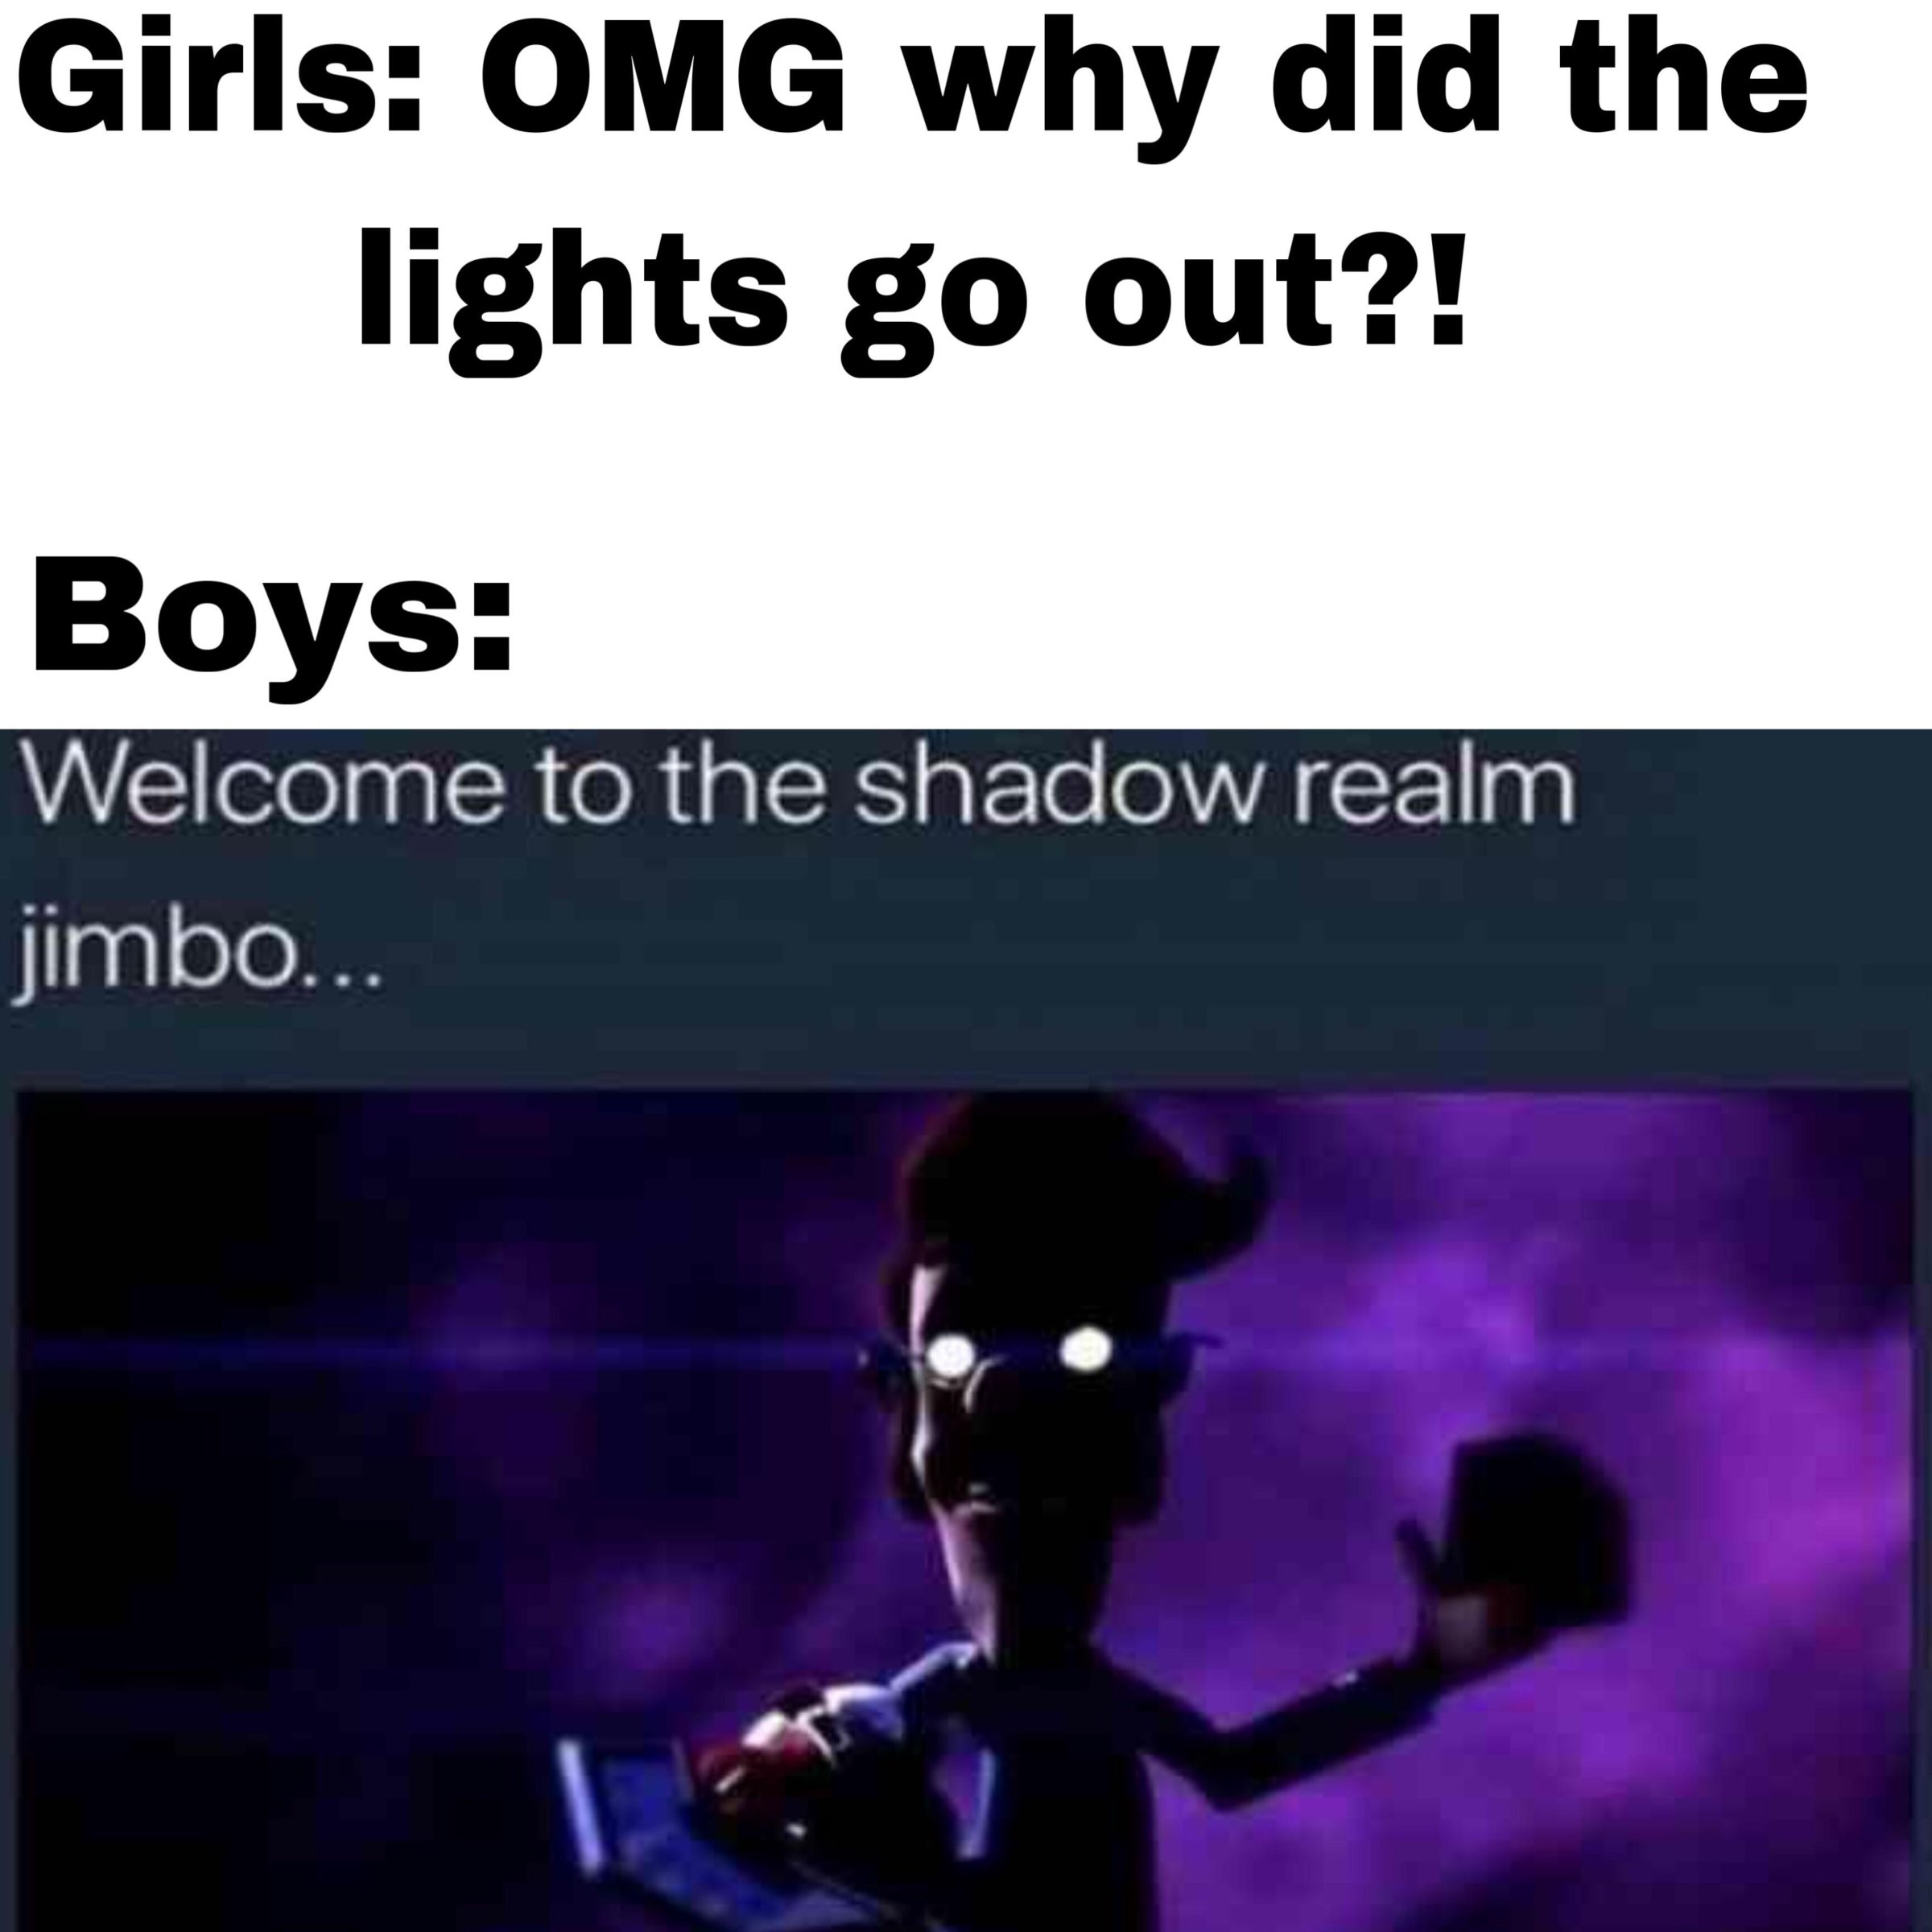 Dank Meme dank-memes cute text: Girls: OMG why did the lights go out?! BOYS: Welcome to the shadow realm jimbo... 